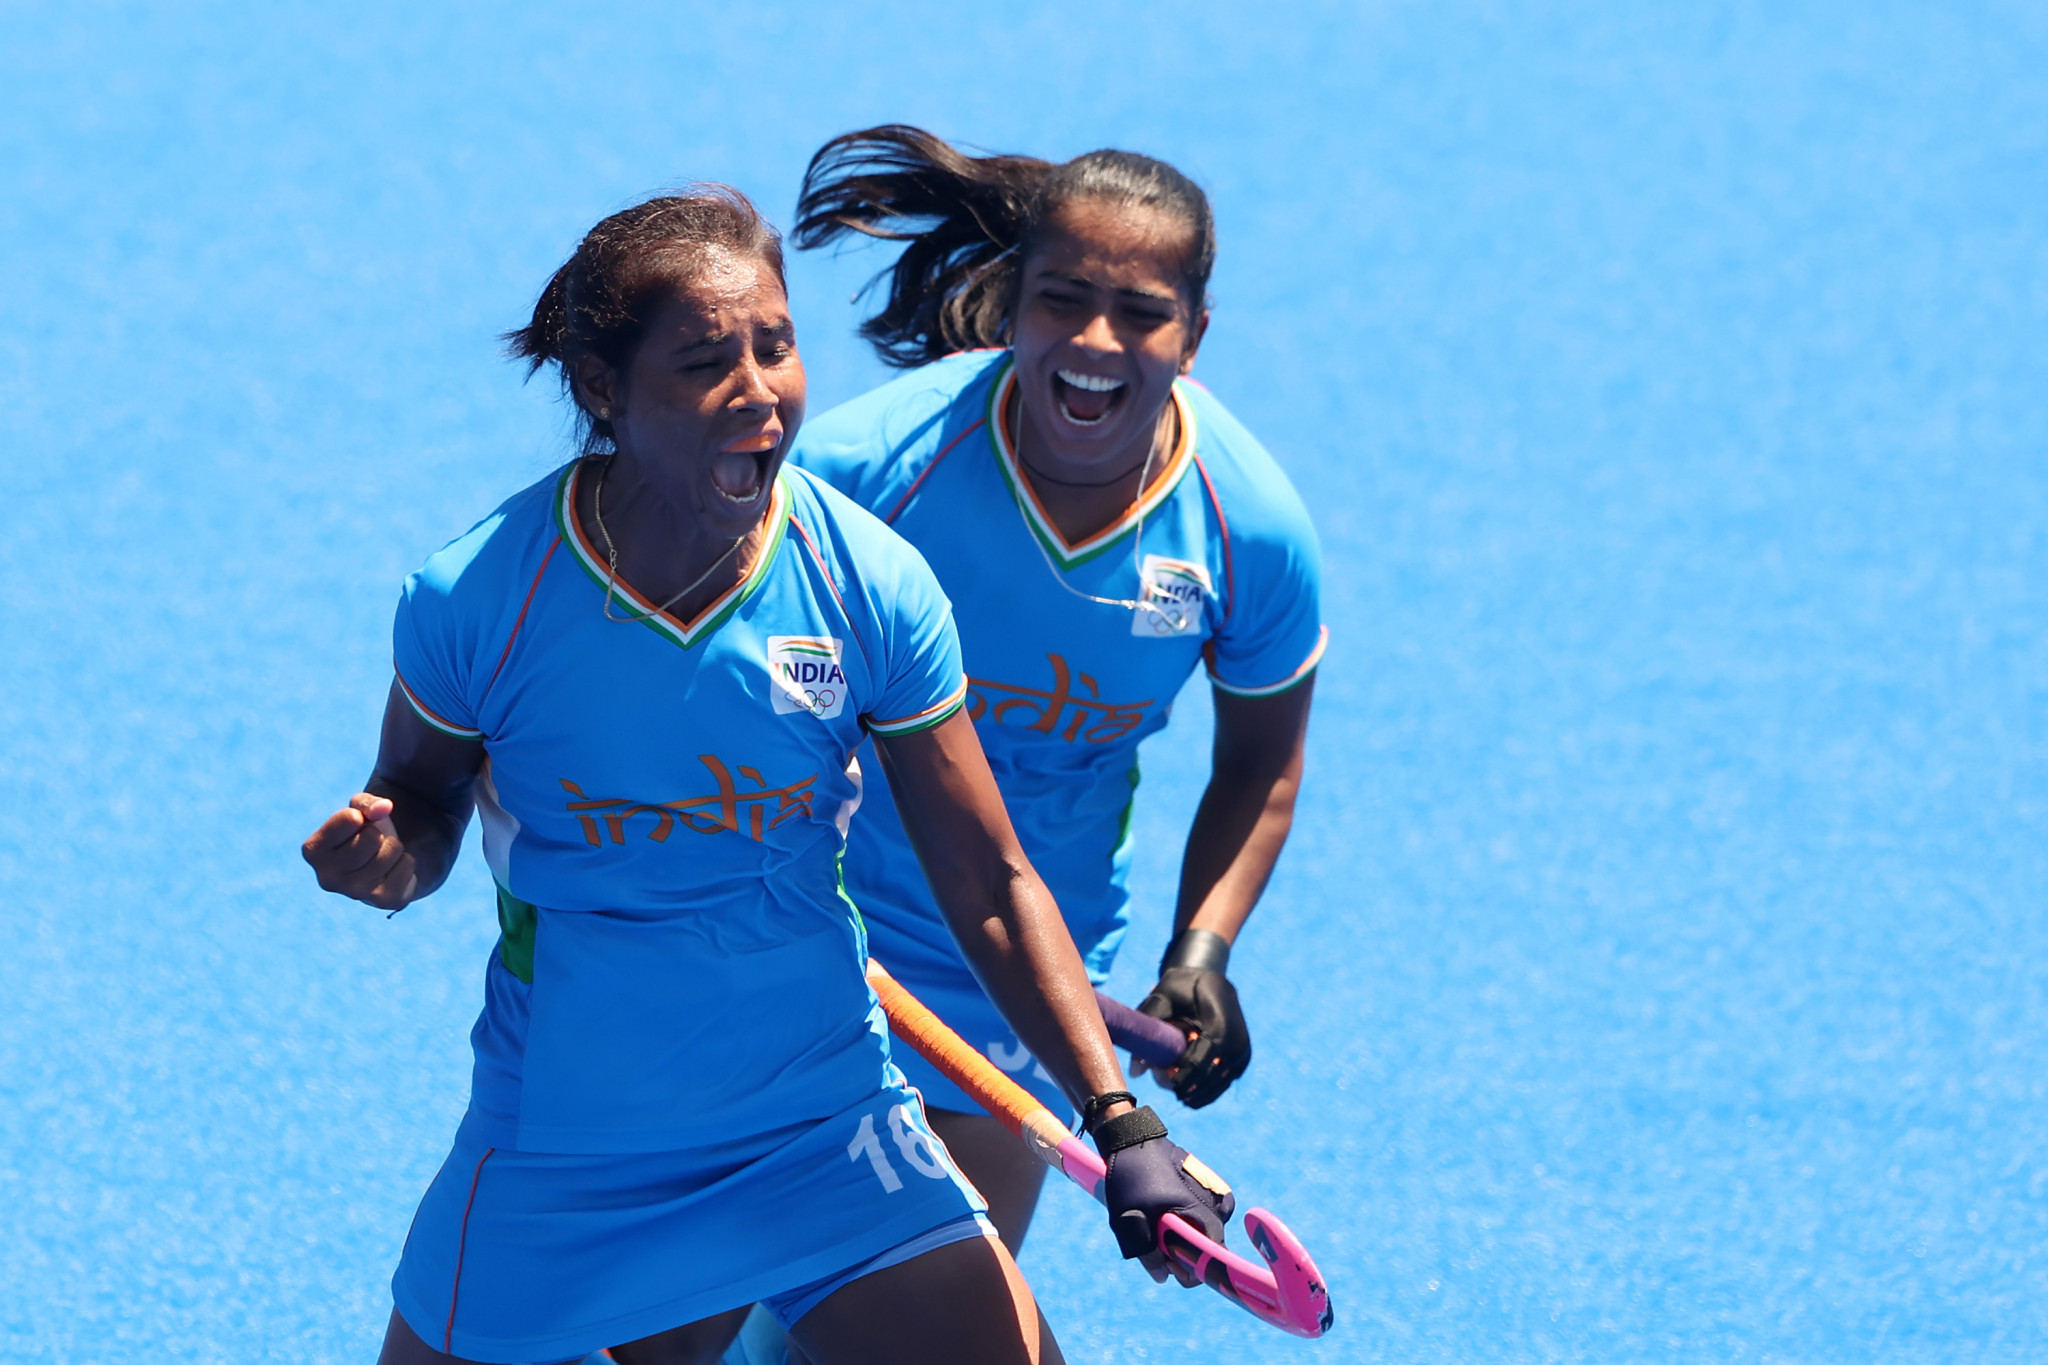 Defending champions India have been given the favourites tag for the Women's Hockey Asia Cup in Muscat ©Getty Images